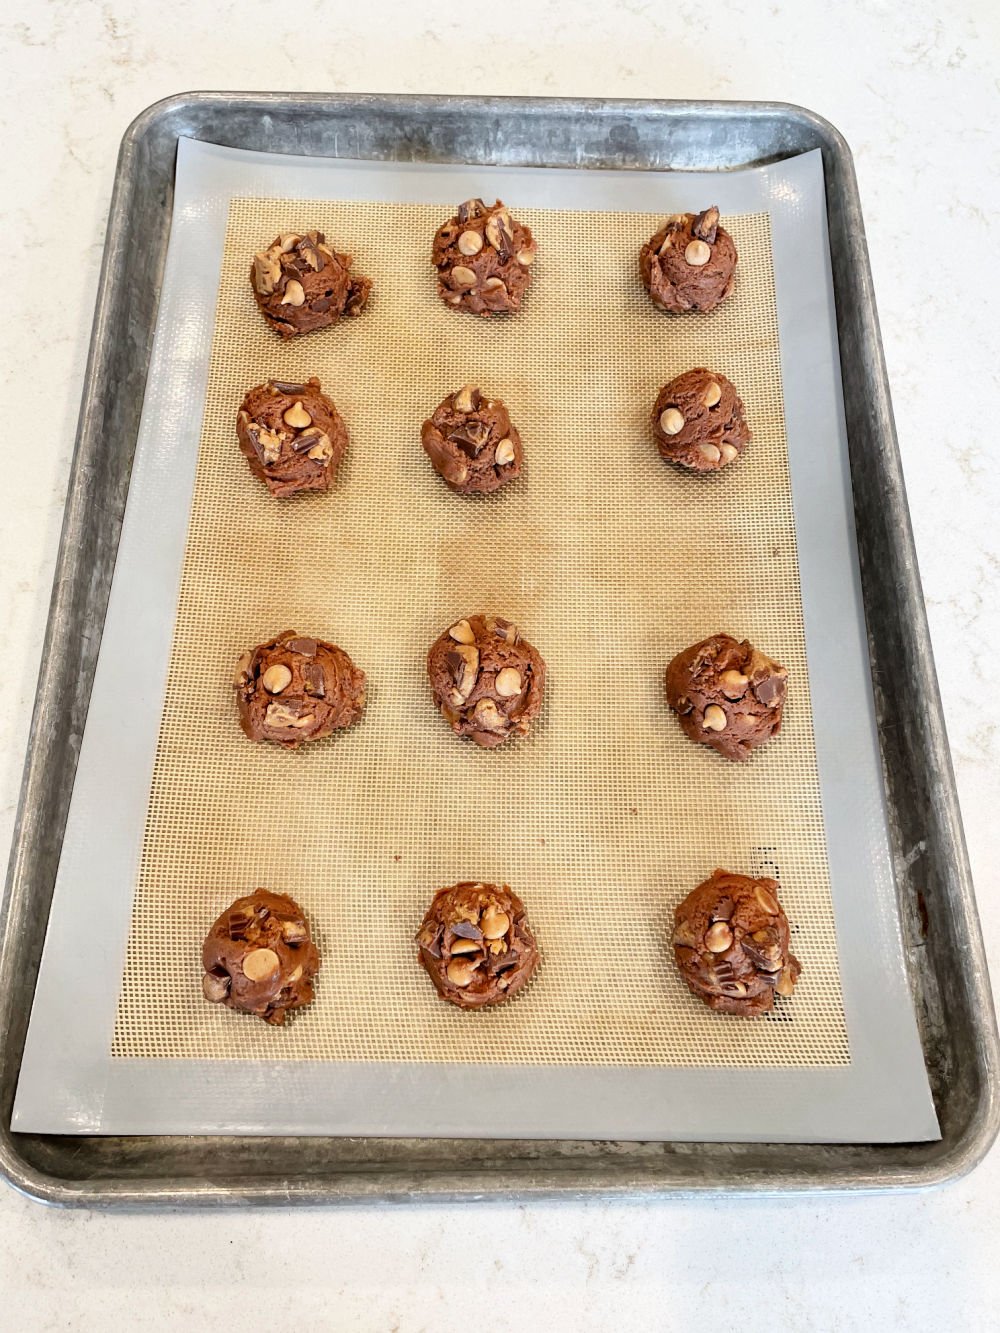 Unbaked Peanut Butter Cup Pudding Cookies on a baking sheet